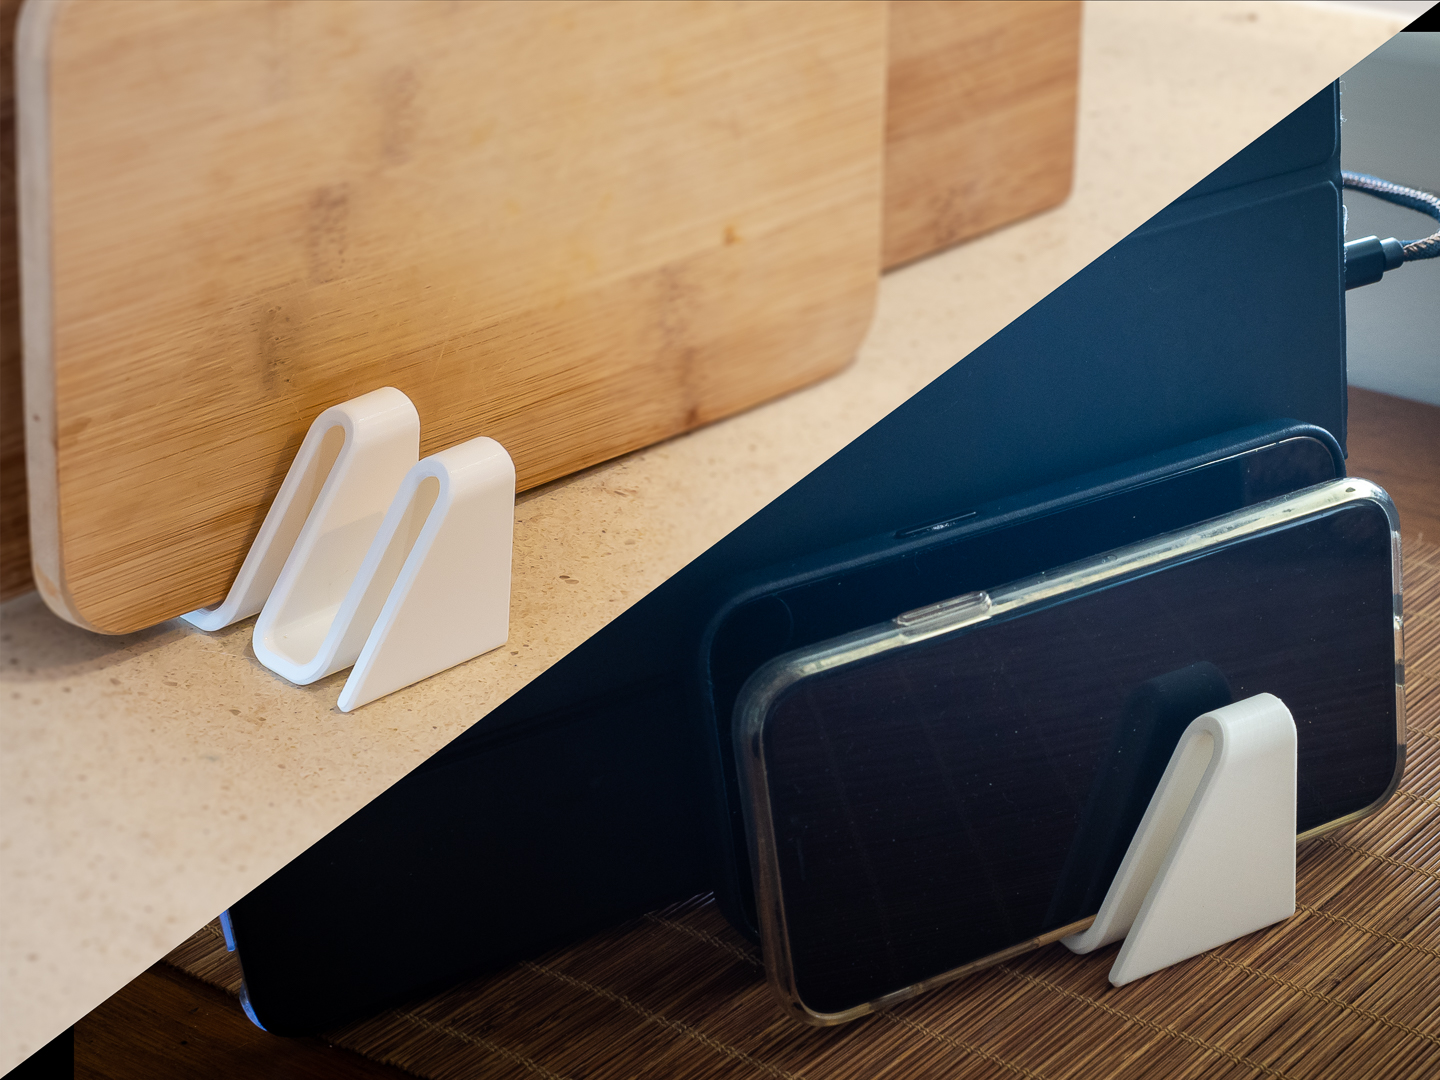 CUTTING BOARD STAND OR CHARGING DOCK